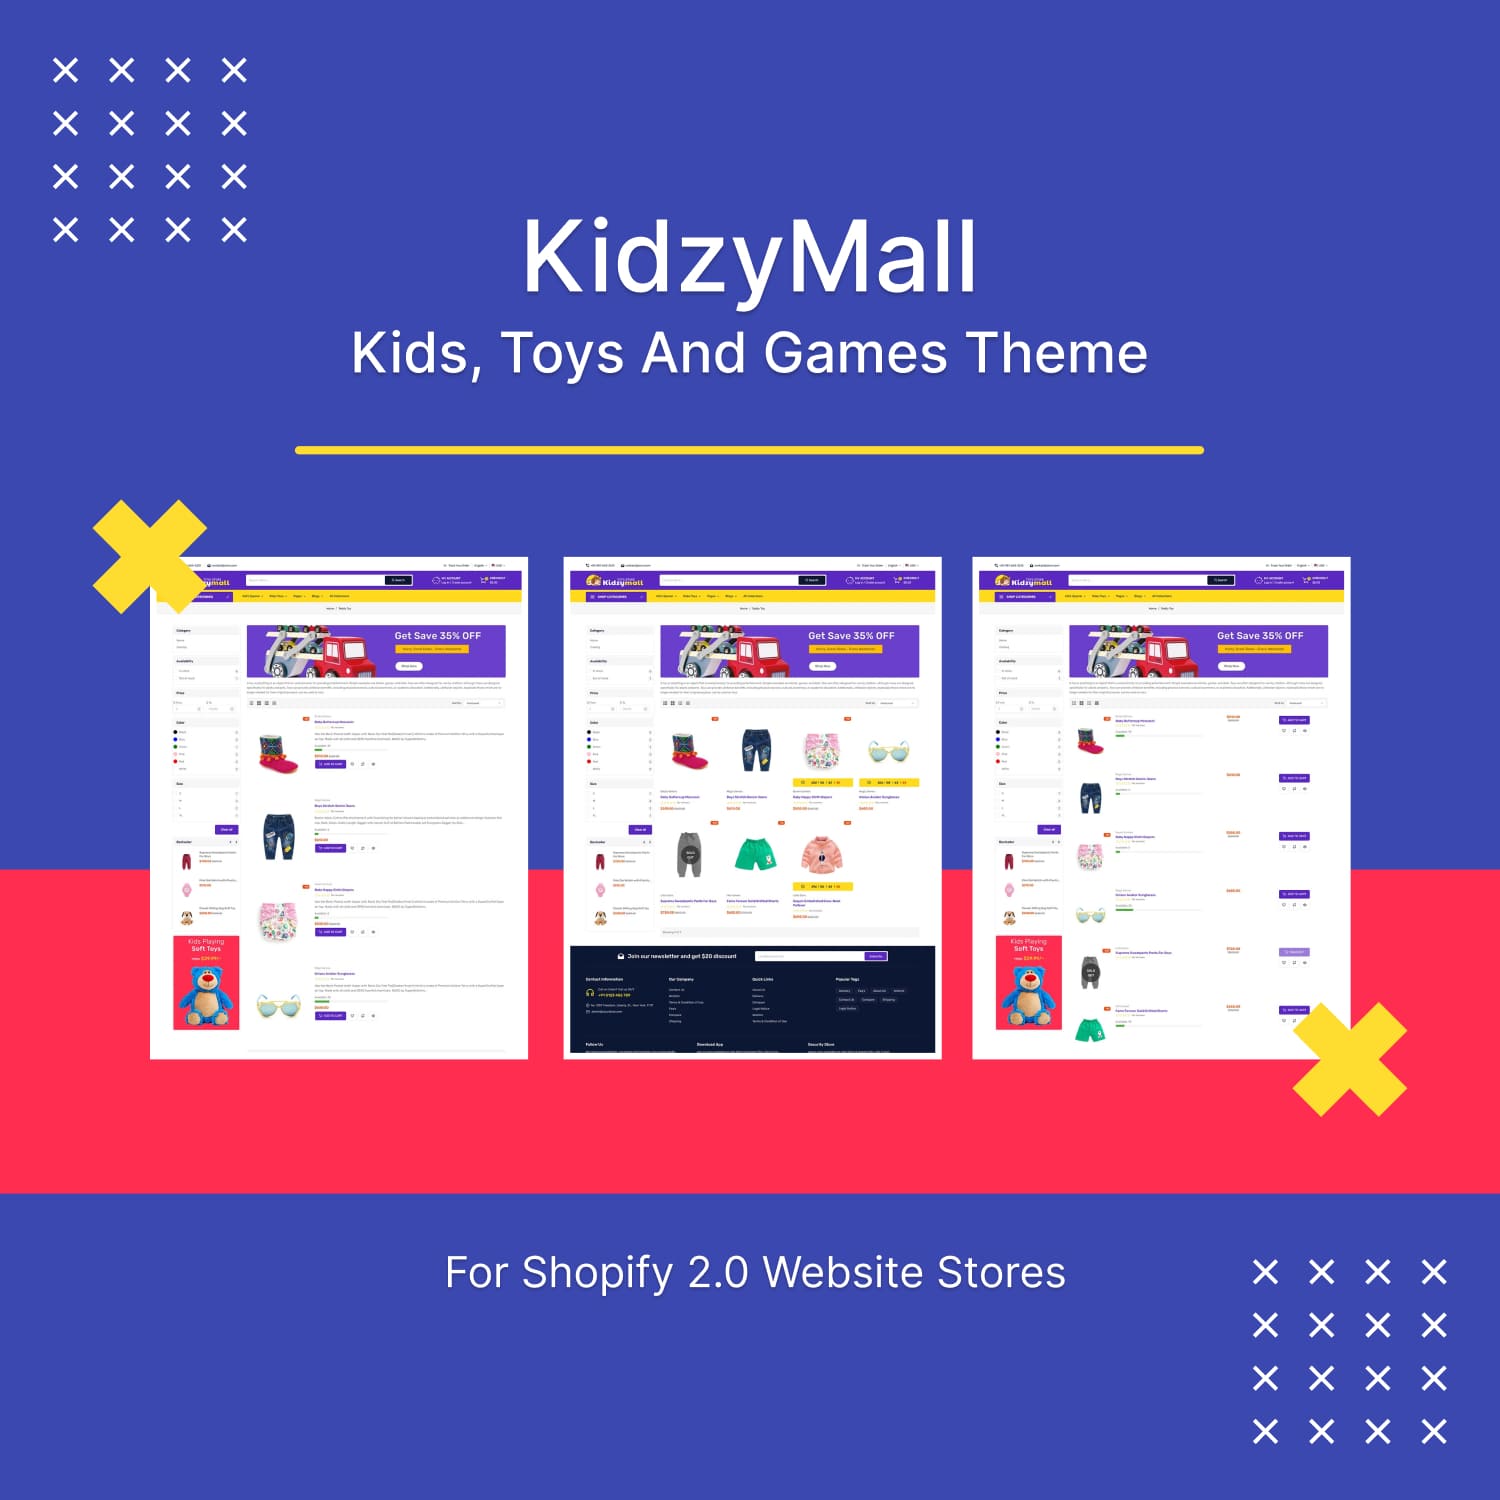 Kidzymall kids toys and games theme for shopify 2.0 website stores, main picture 1500x1500.